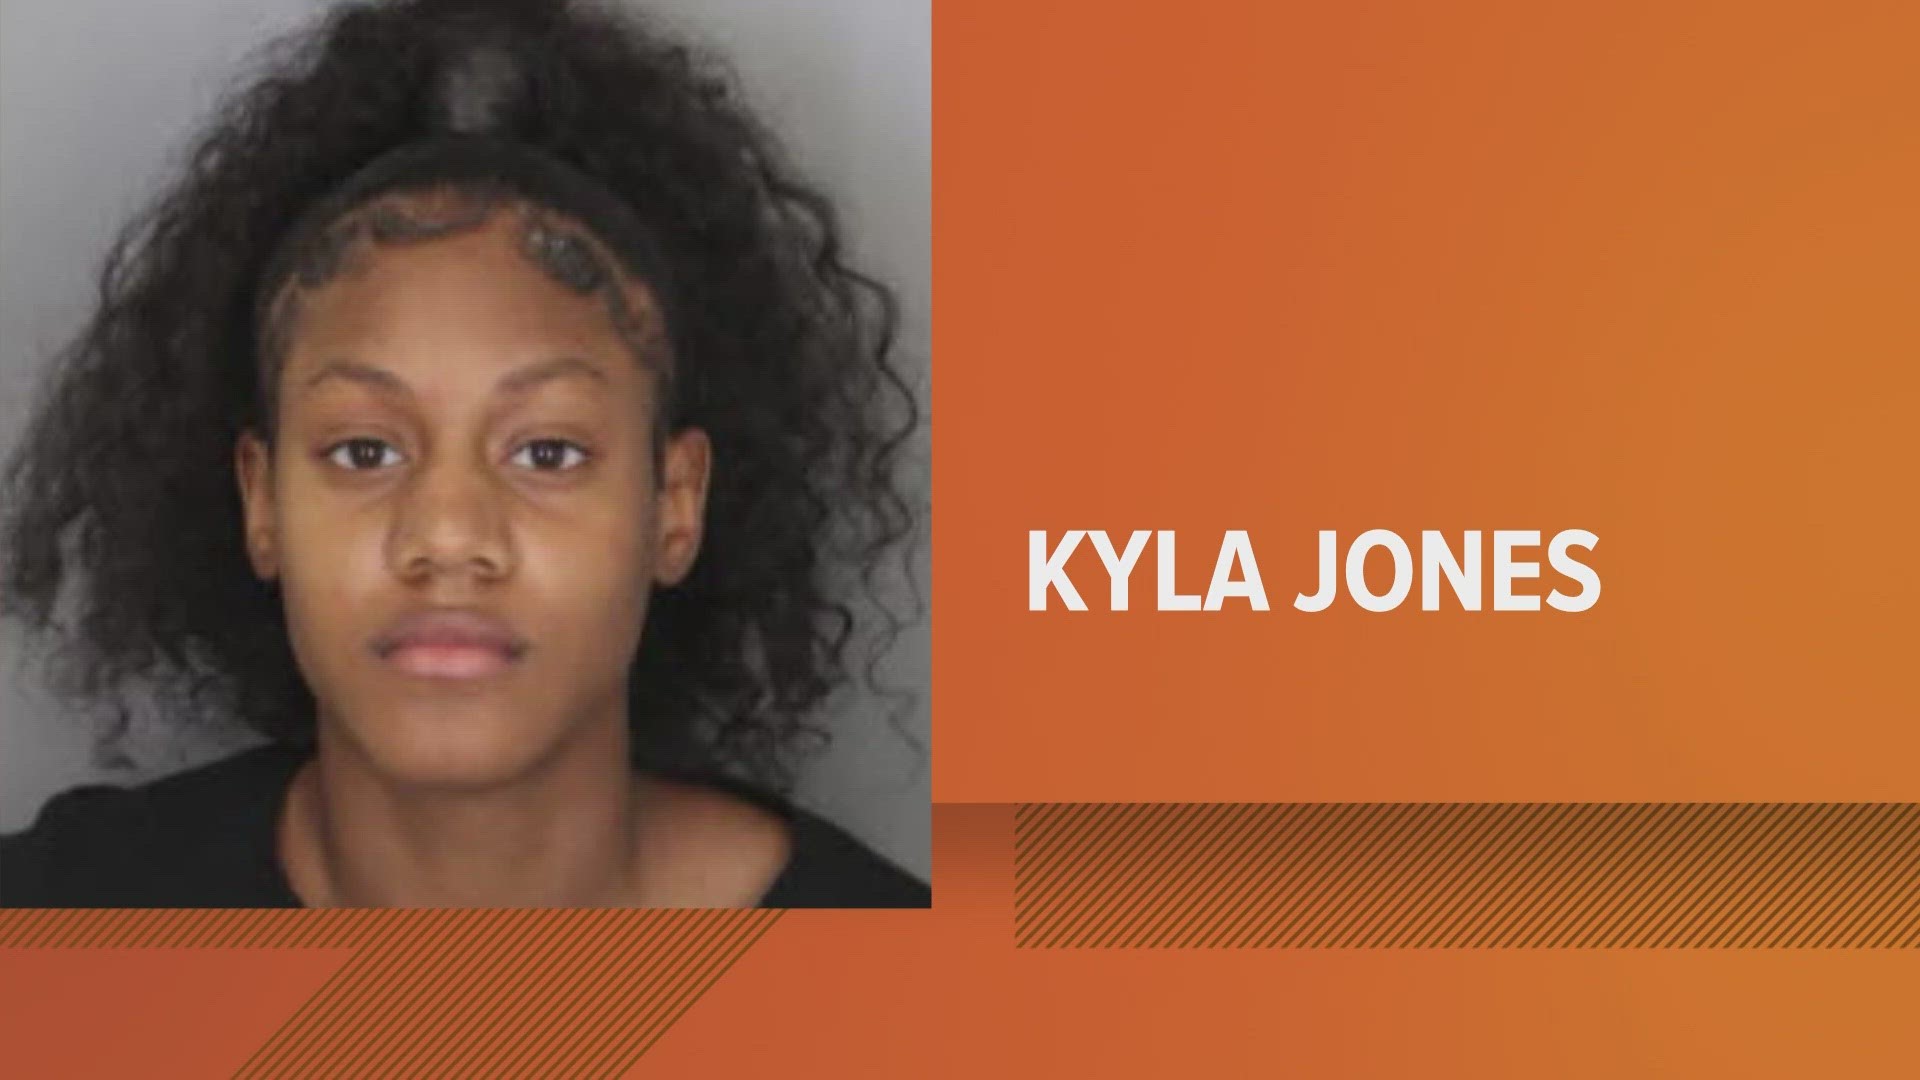 Kyla Jones is currently being held on state warrants for first-degree murder, assault, and reckless endangerment, according to court records.